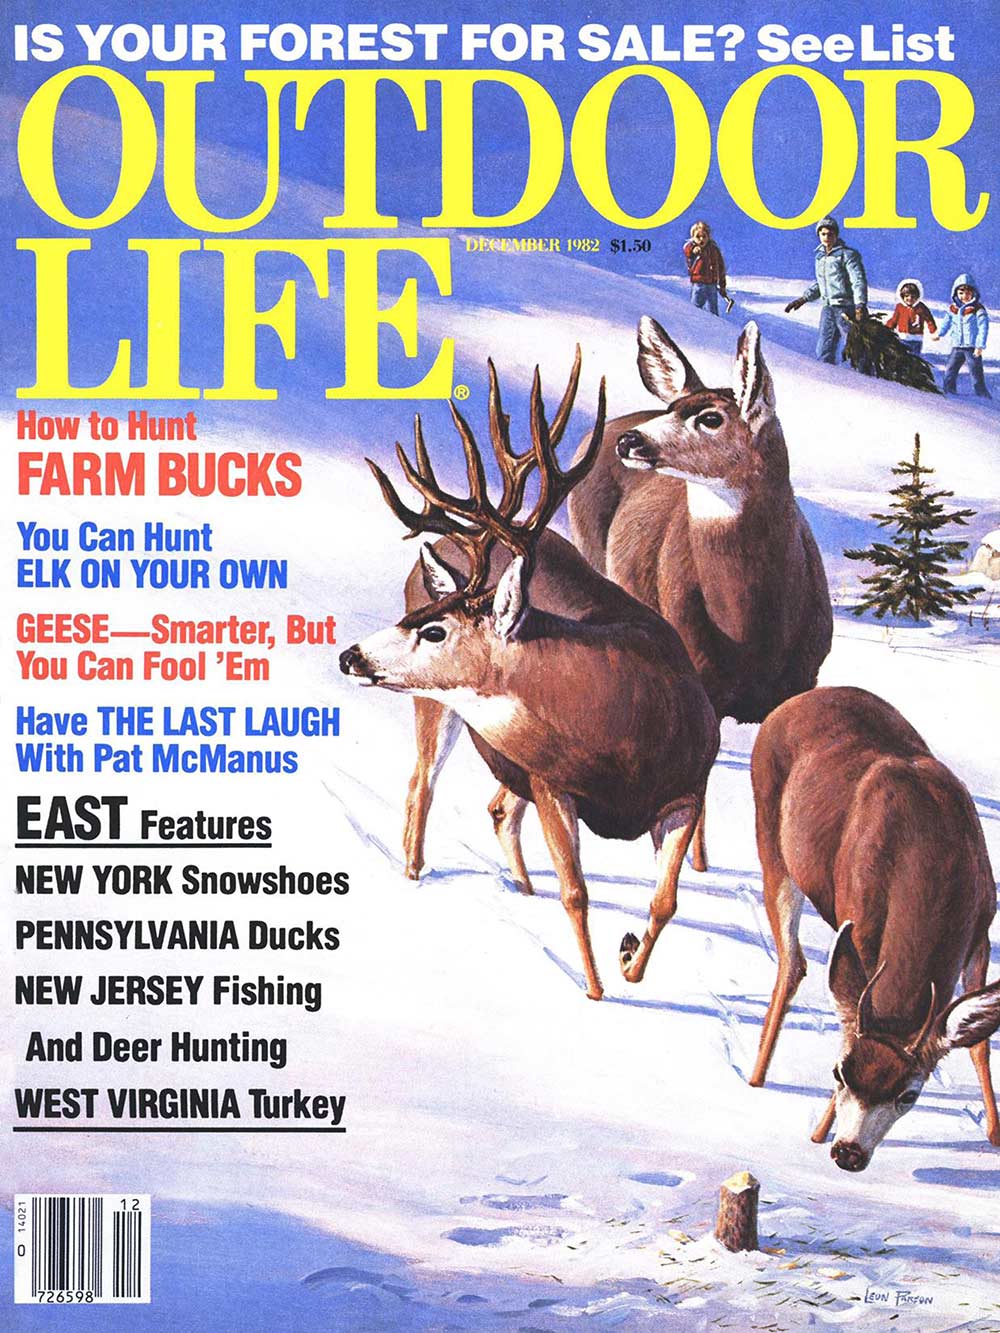 December 1982 Cover of Outdoor Life